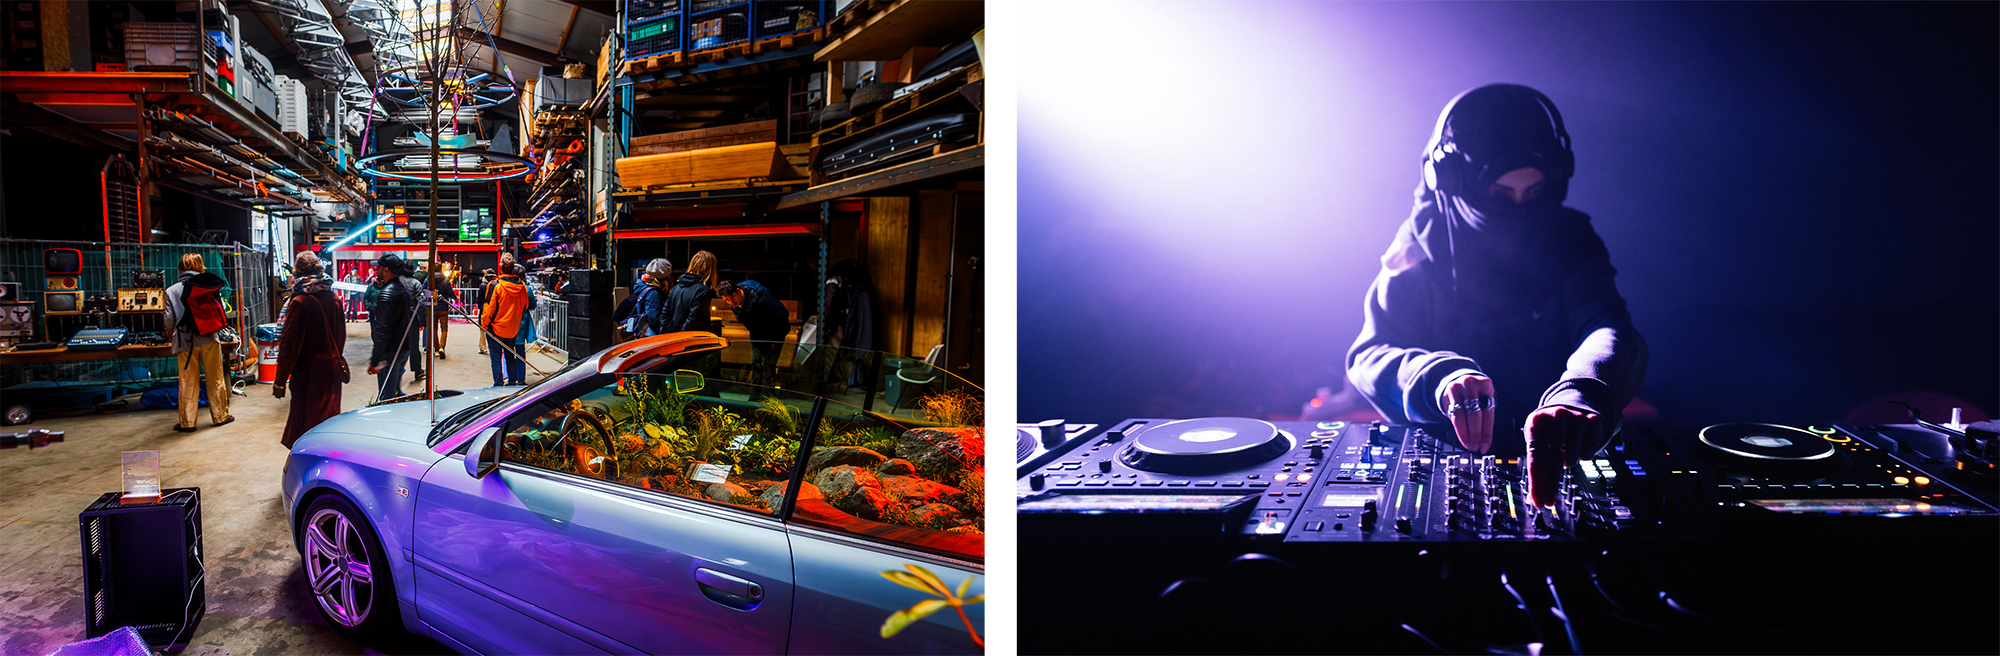 on the left is a photo of an art installation. on the right a photo of young woman wearing a hijab while djing 